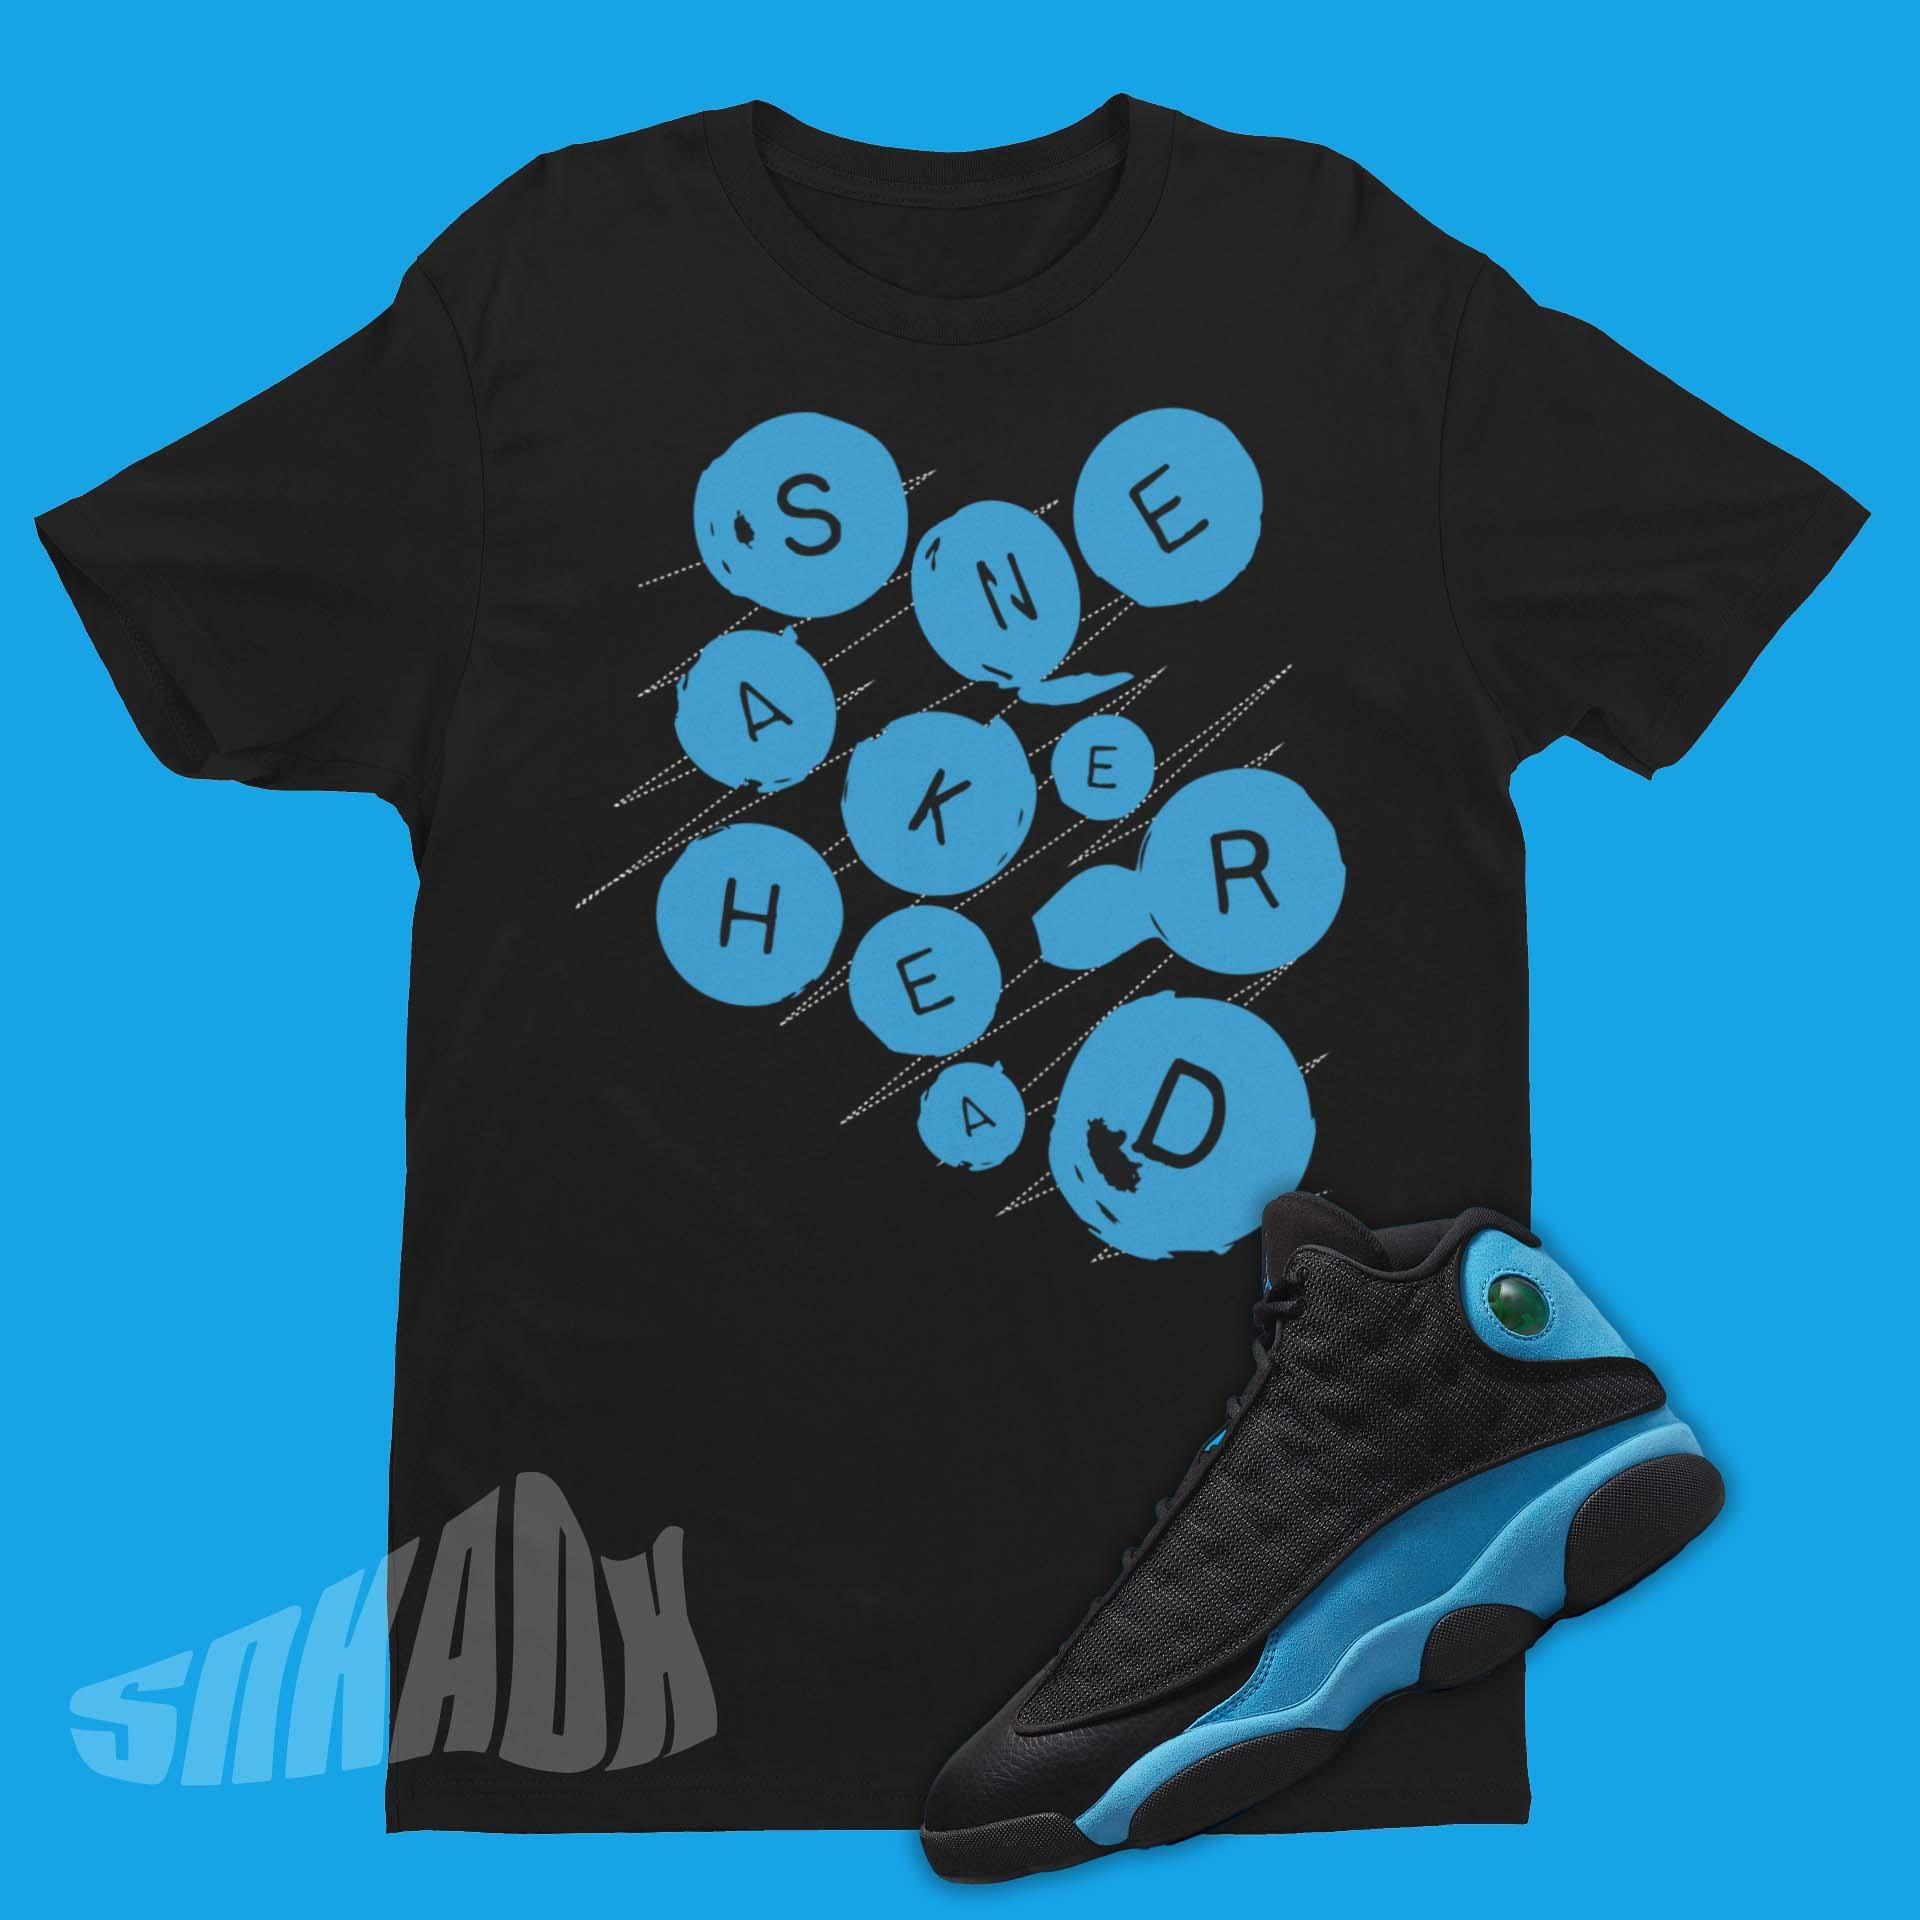 blue and black jordan 13 outfit